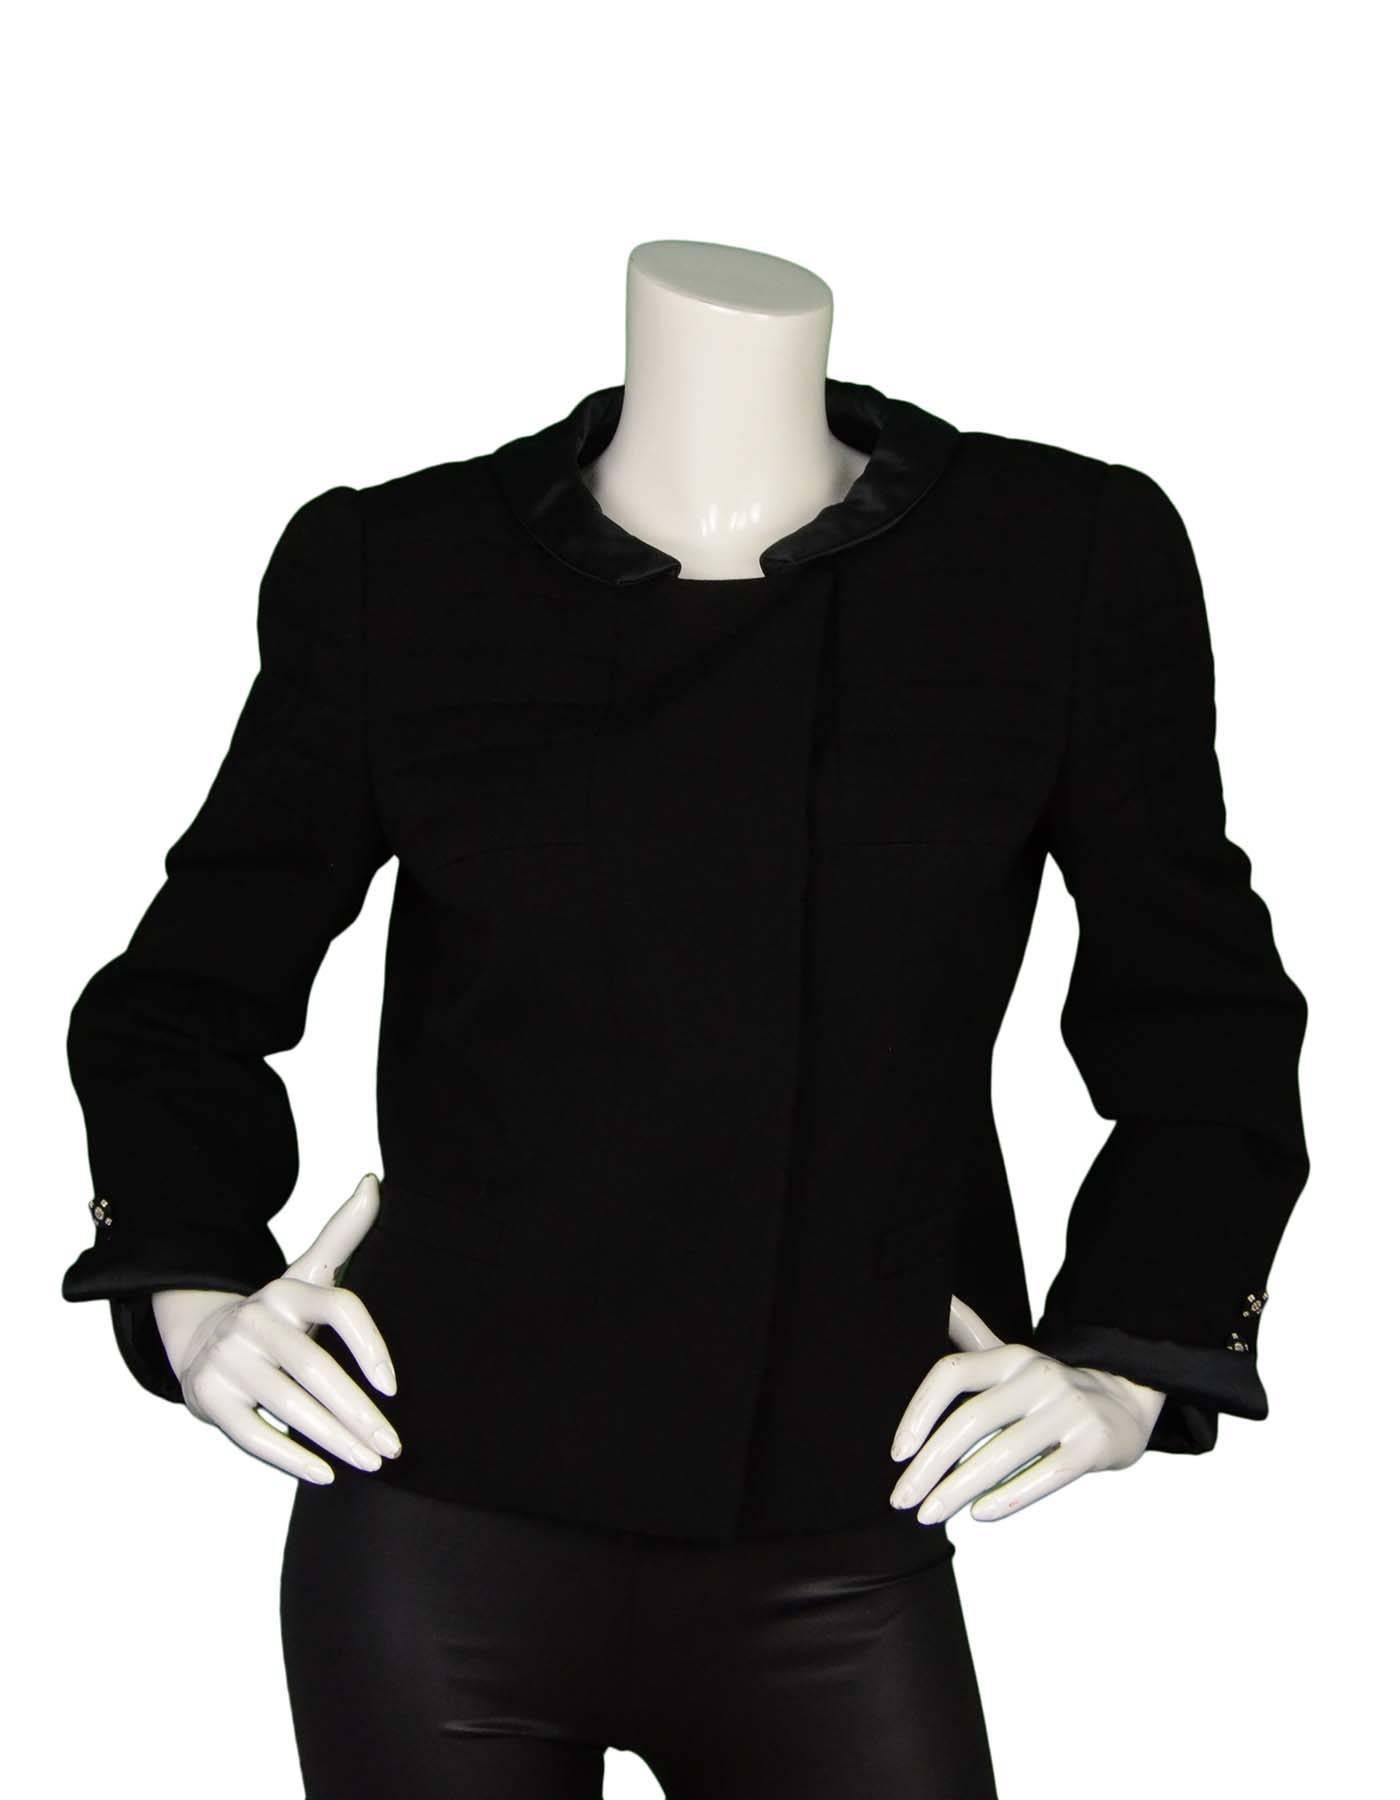 Chanel Black Wool Jacket Sz 44
Features light shoulder padding with quilted detail, and sateen trim at collar and sleeves with rhinestone buttons

Made In: France
Year of Production: 2006 Autumn
Color: Black
Composition: 100% Wool
Lining: